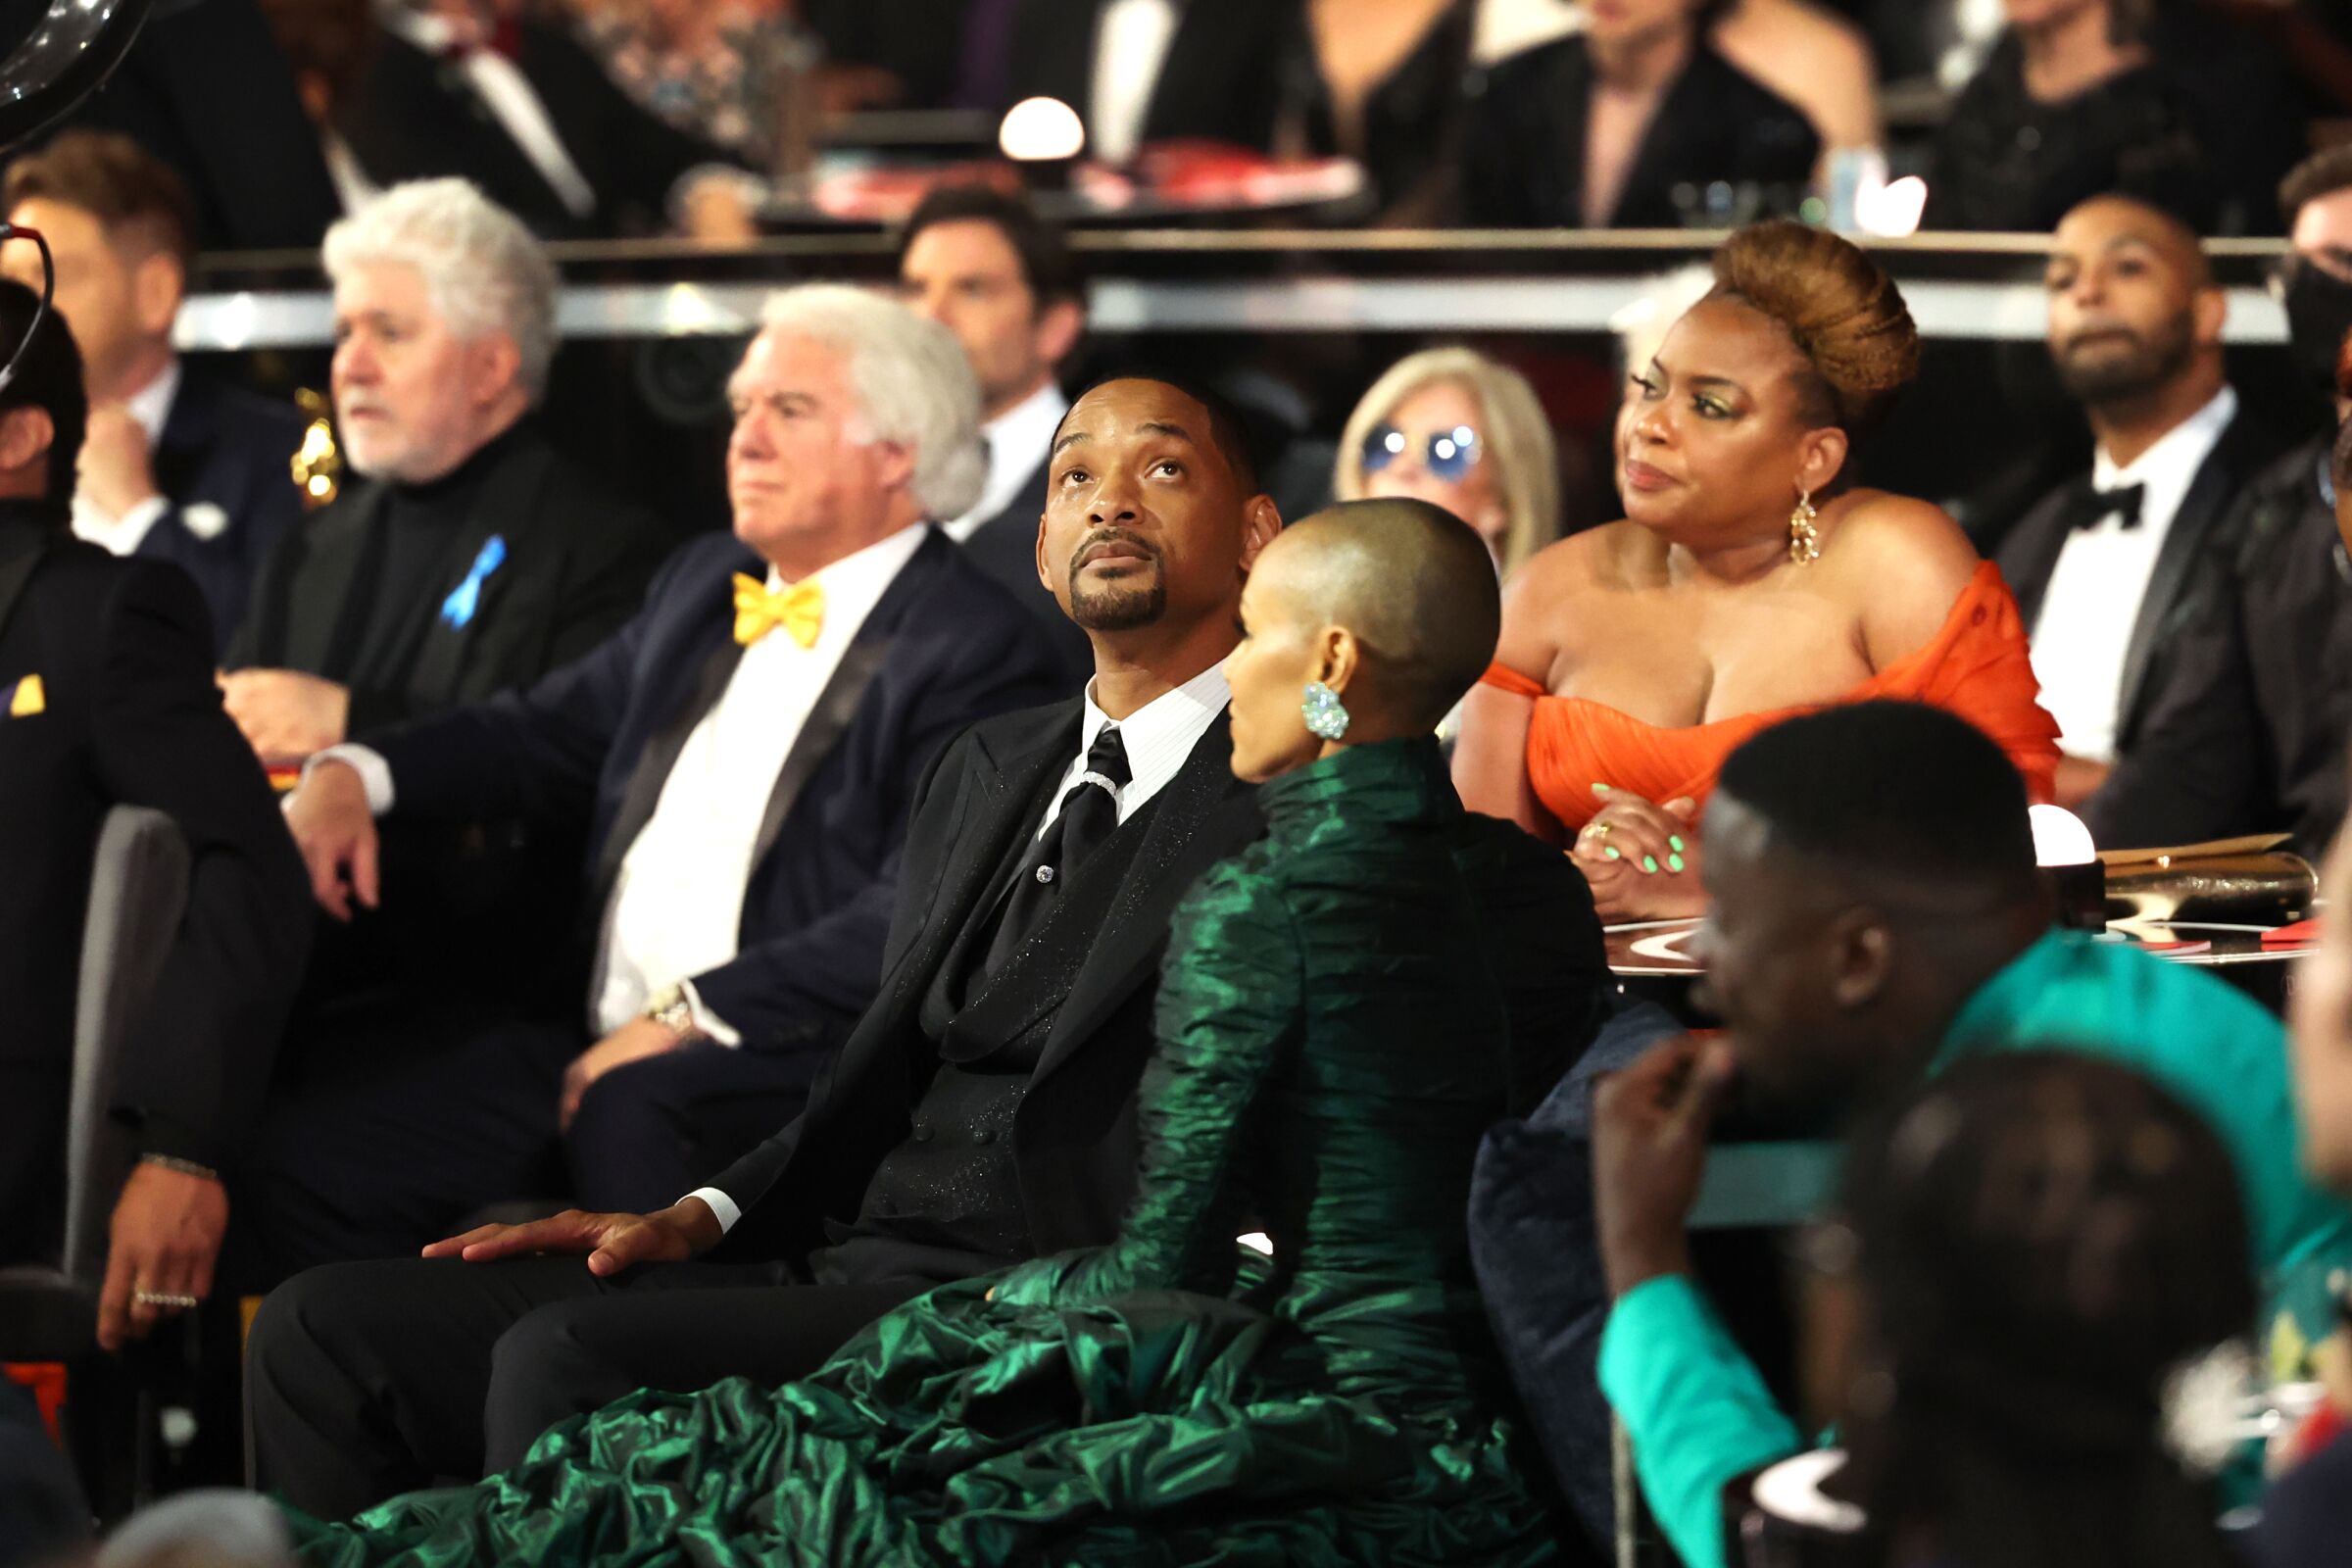 Will Smith and Jada Pinkett Smith at the Oscars before things got heated.